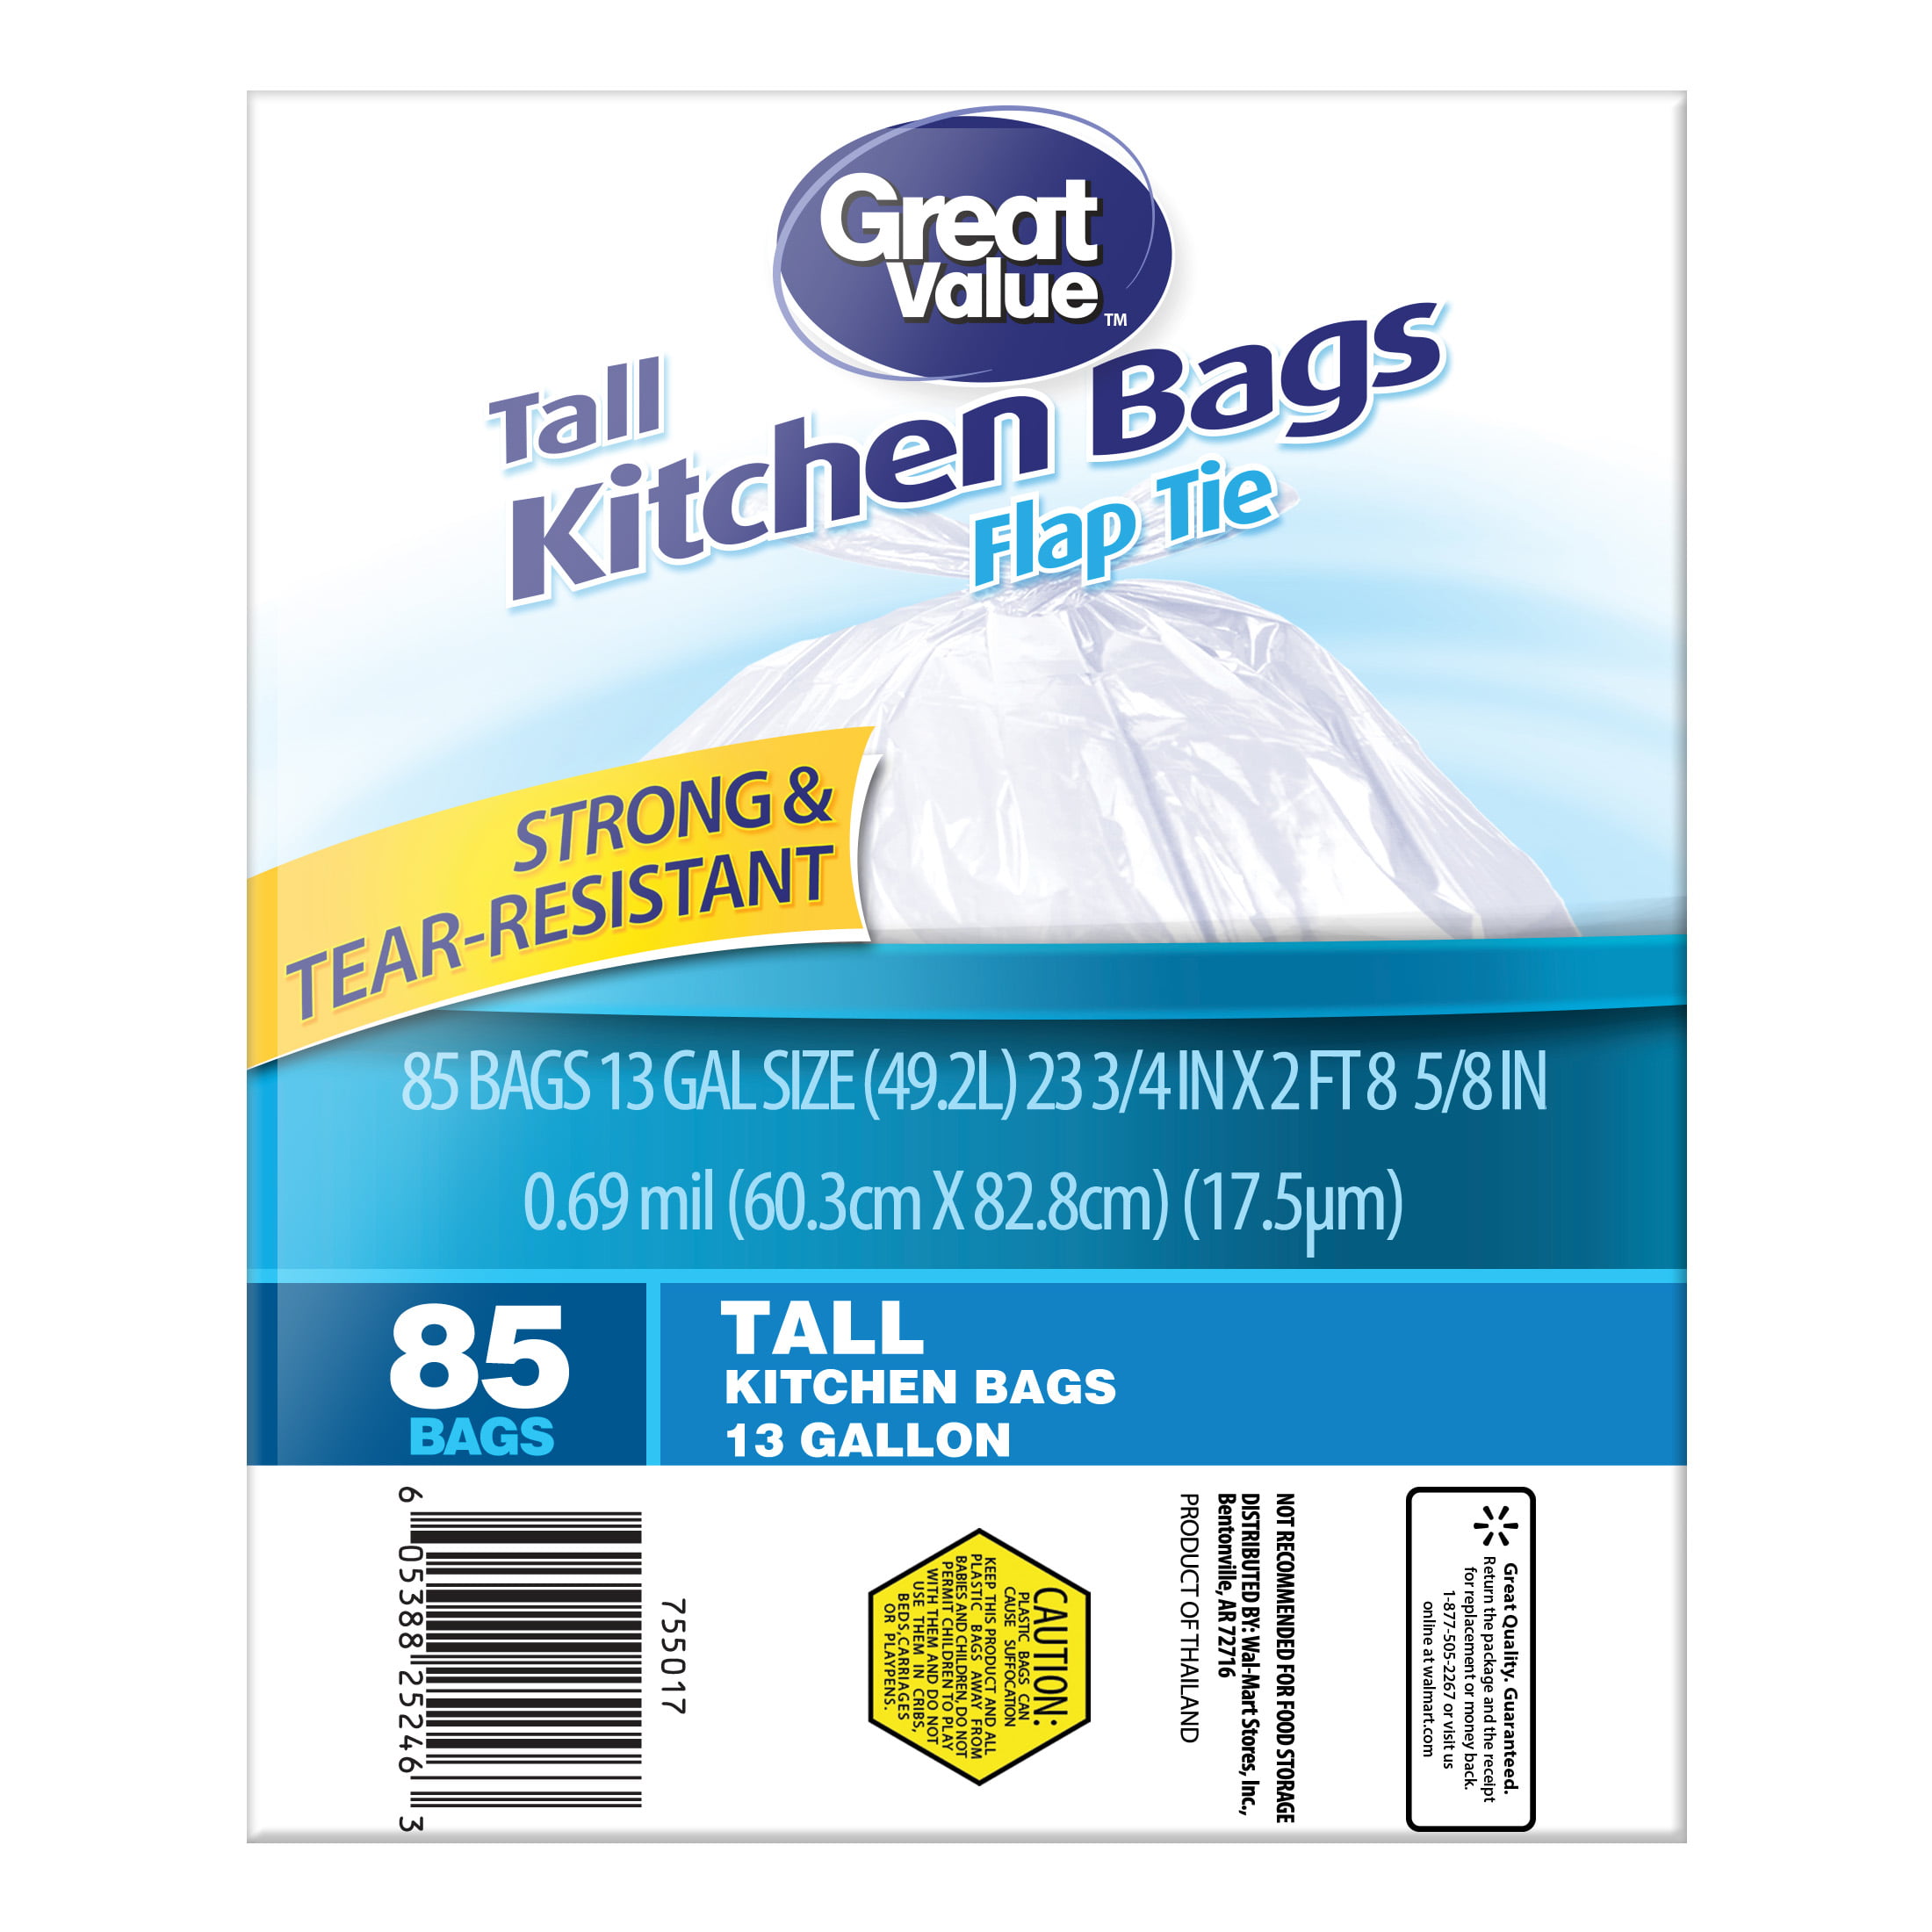 Signature SELECT Tall Kitchen Bags With Handle Tie 13 Gallon - 45 Count -  Tom Thumb